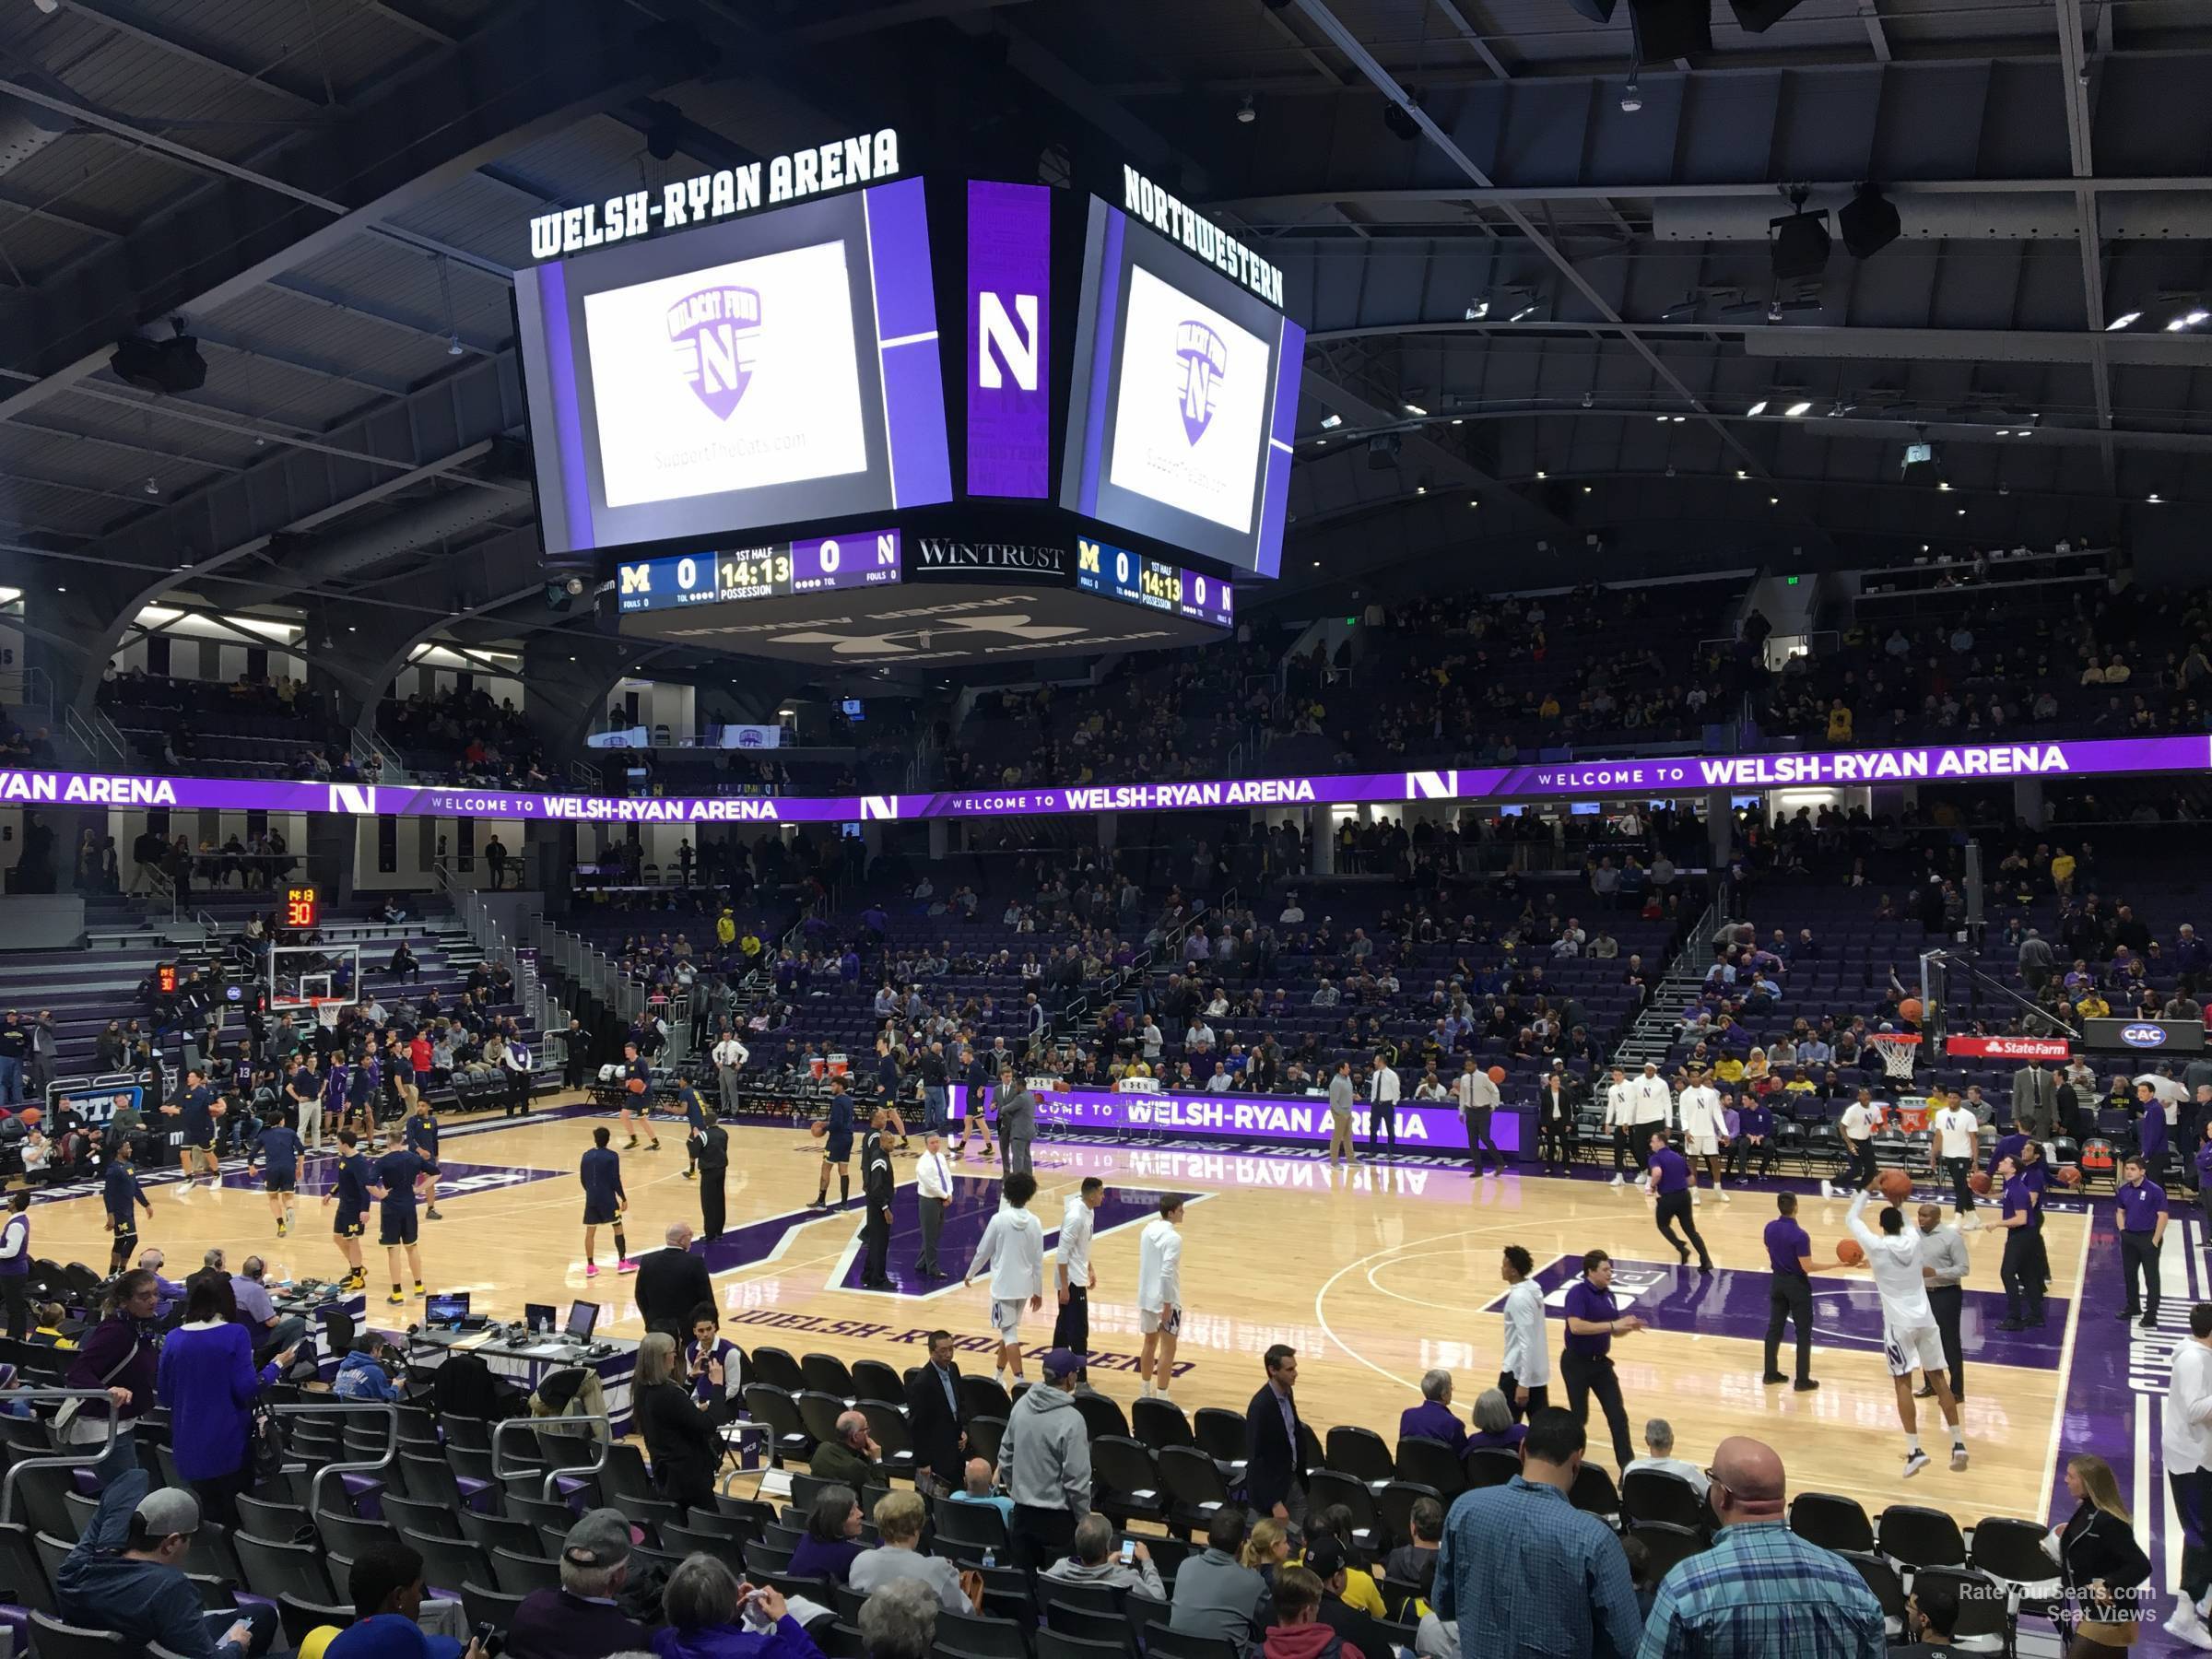 section 115, row 12 seat view  - welsh-ryan arena